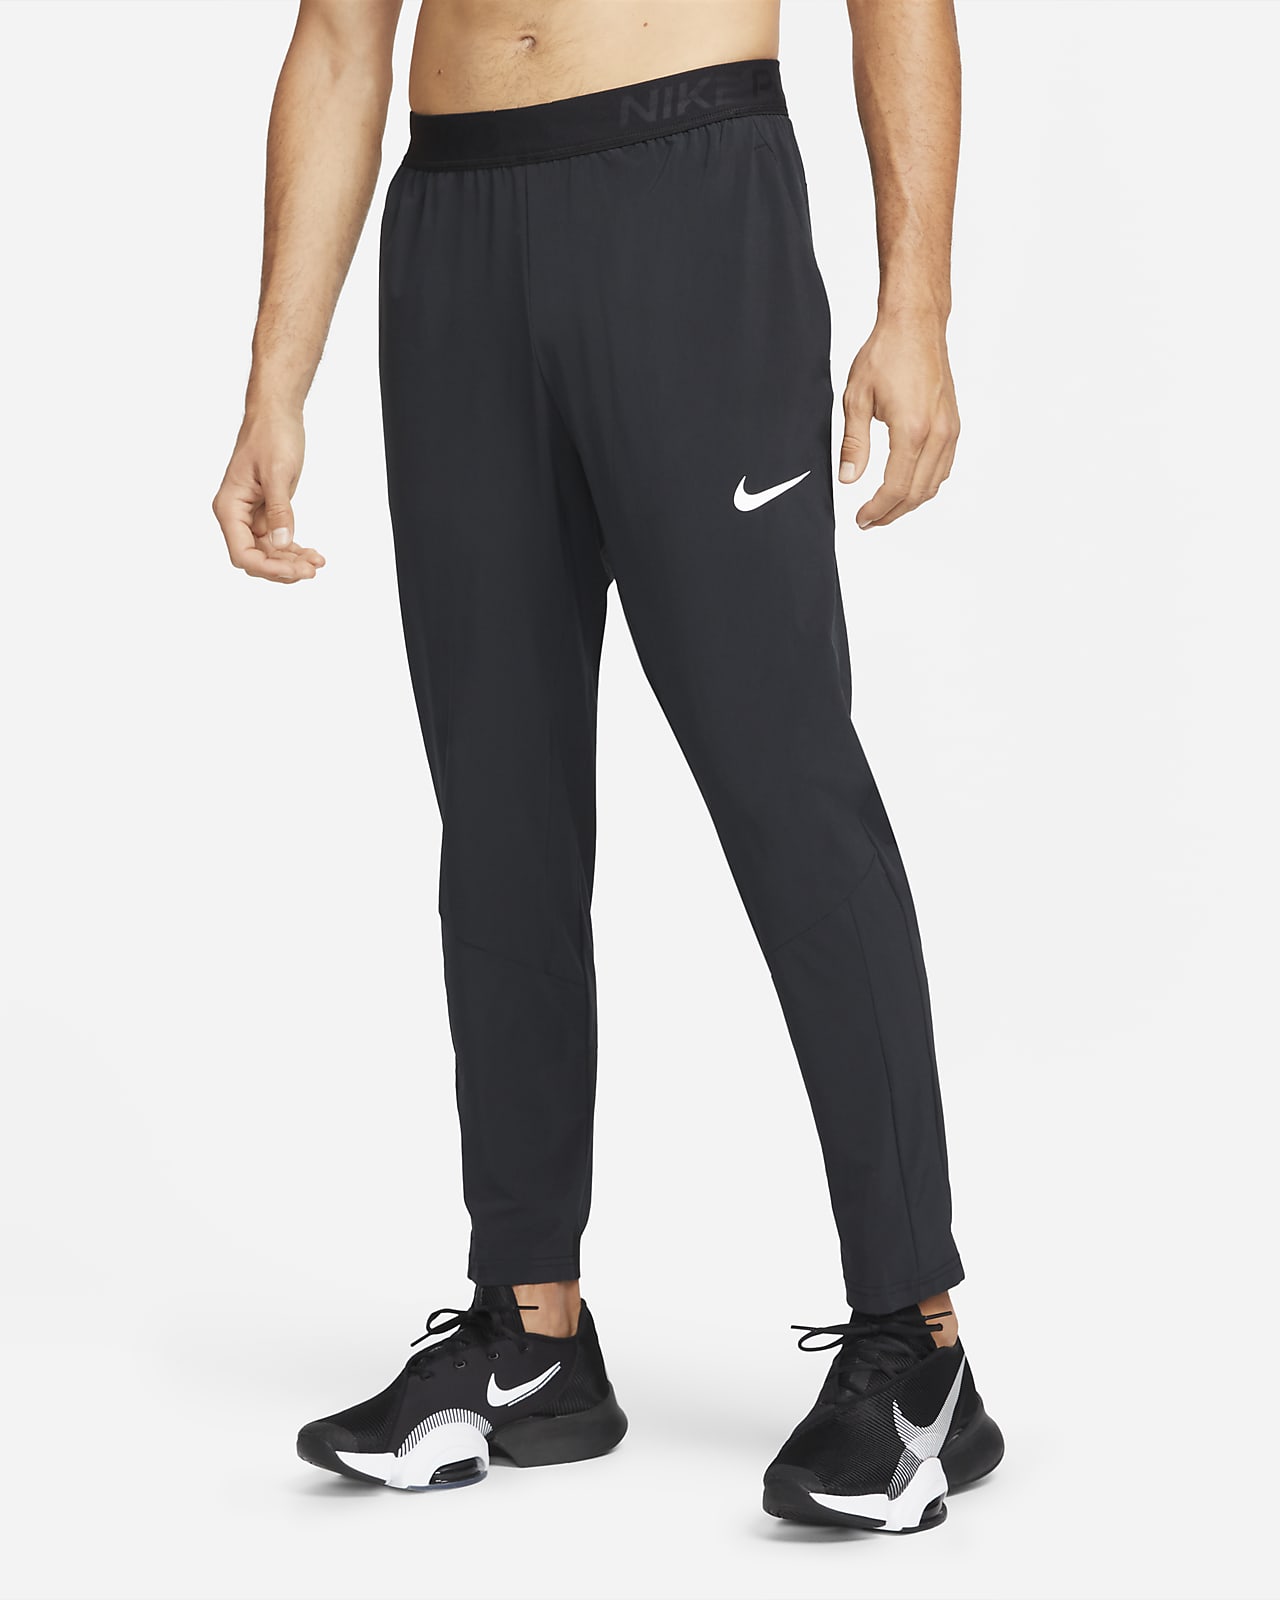 Women's Nike Pro Training & Gym Trousers & Tights. Nike IL